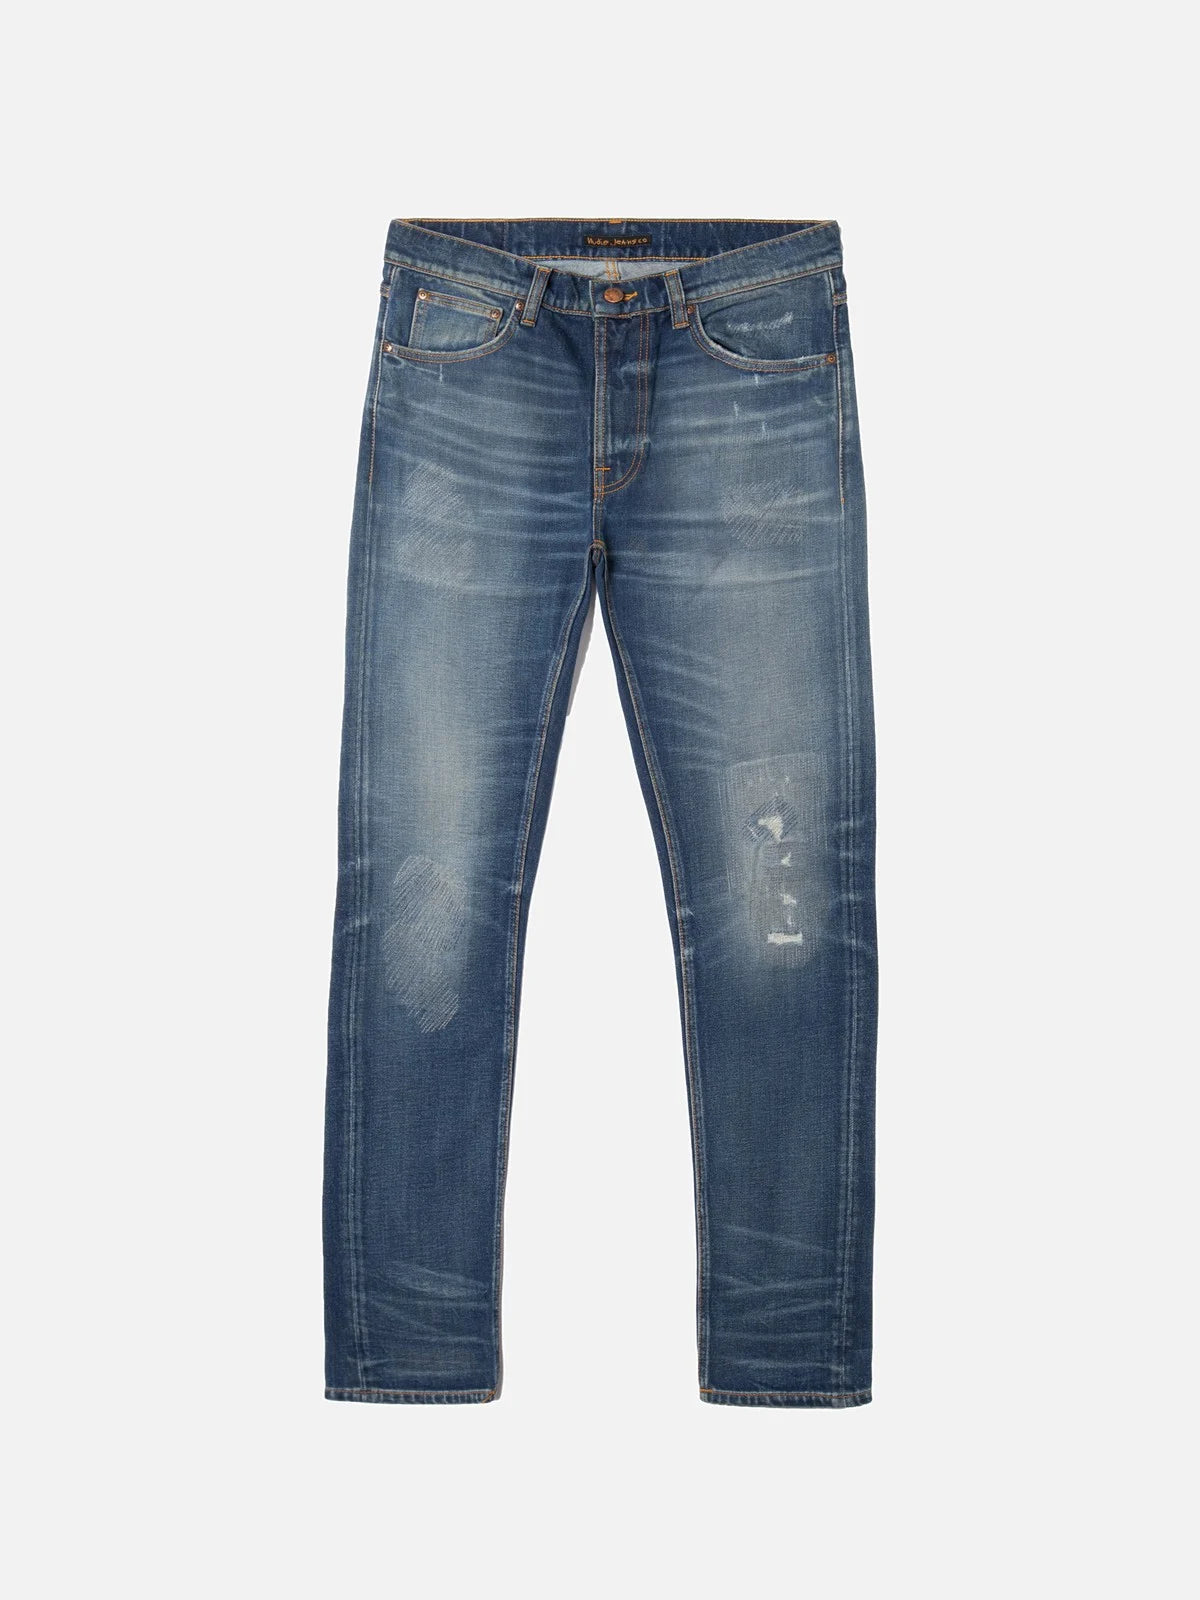 Champ Athletic Fit Jeans in Deep Refined